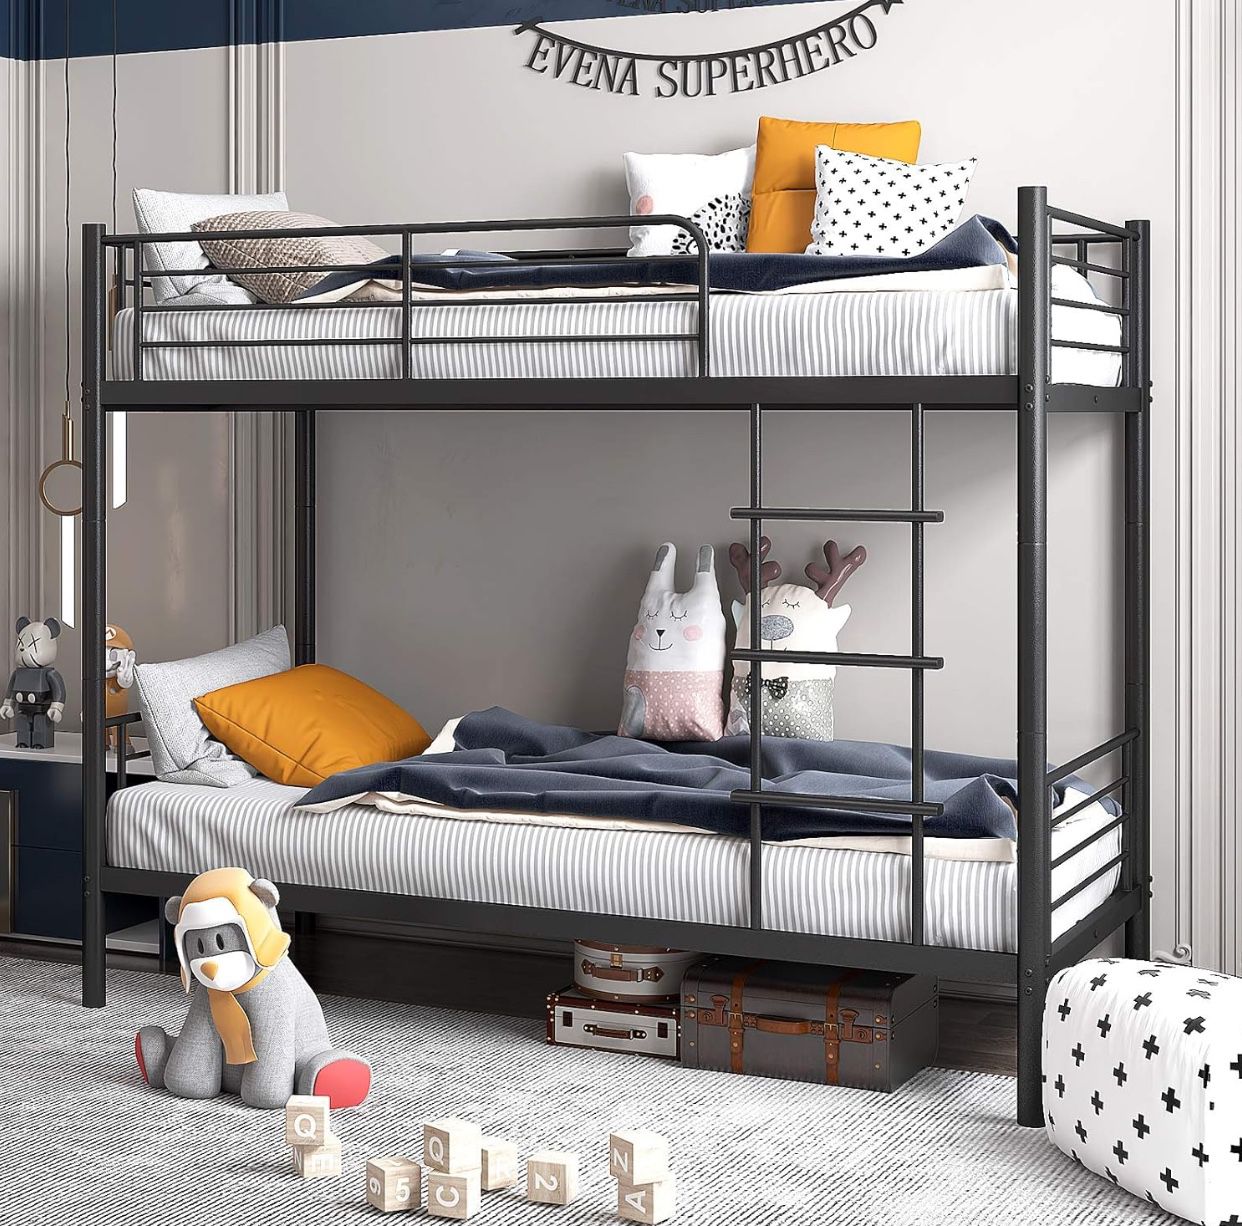 Twin Bunk beds 